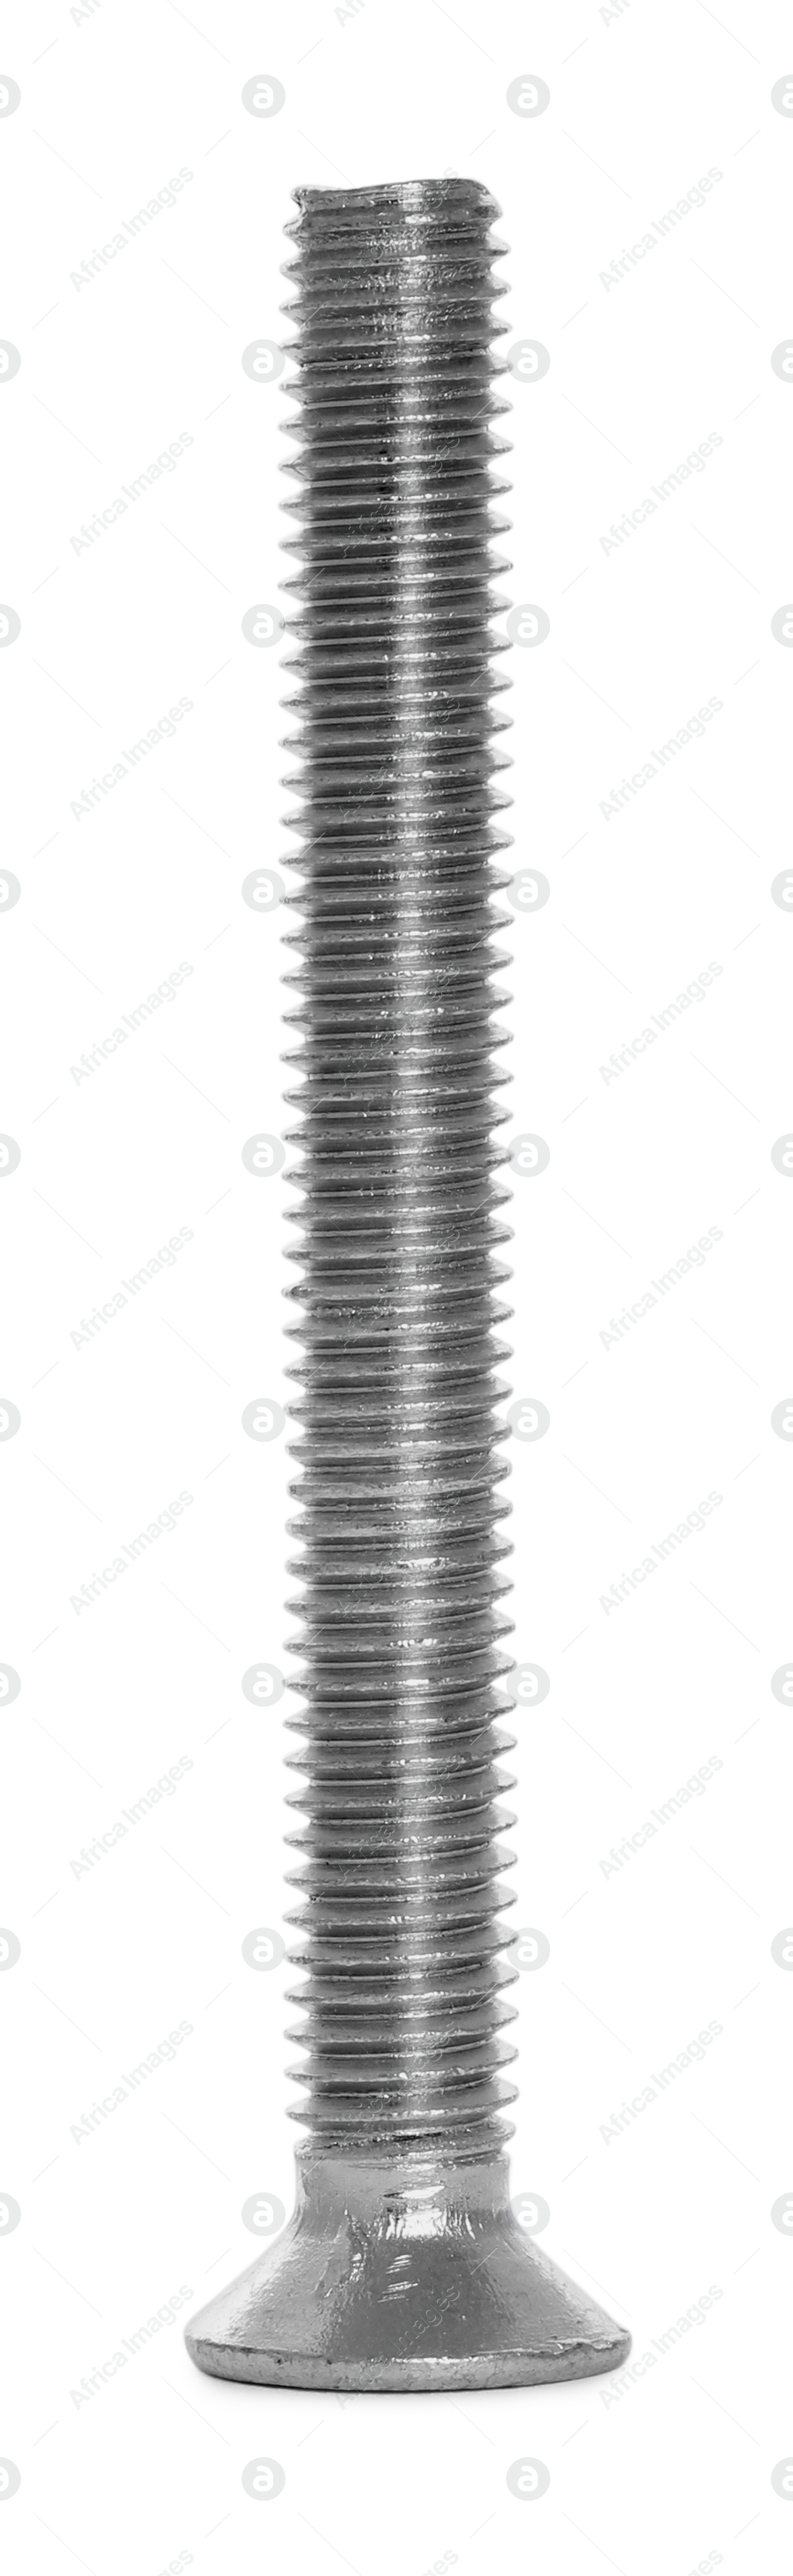 Photo of One metal plow bolt isolated on white